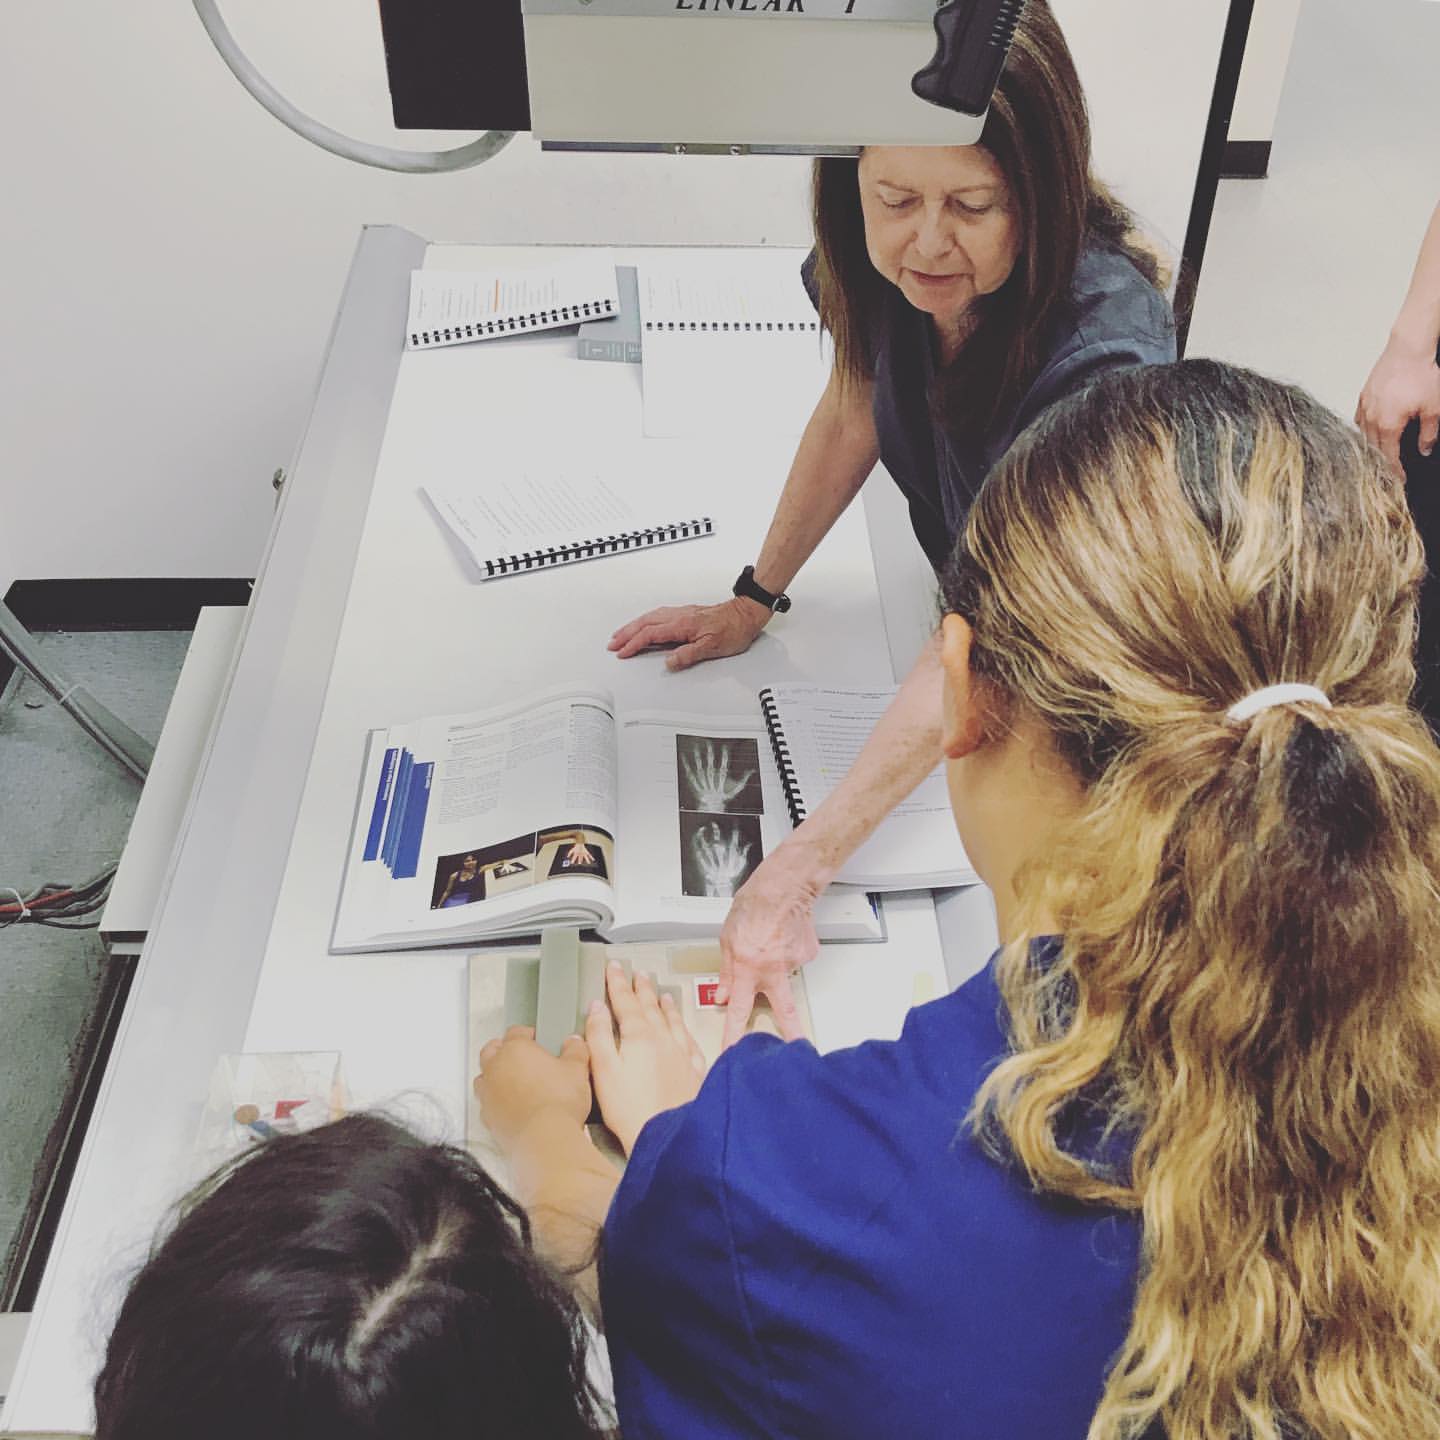 Students in our evening X-ray Technician class work alongside their experienced instructor.